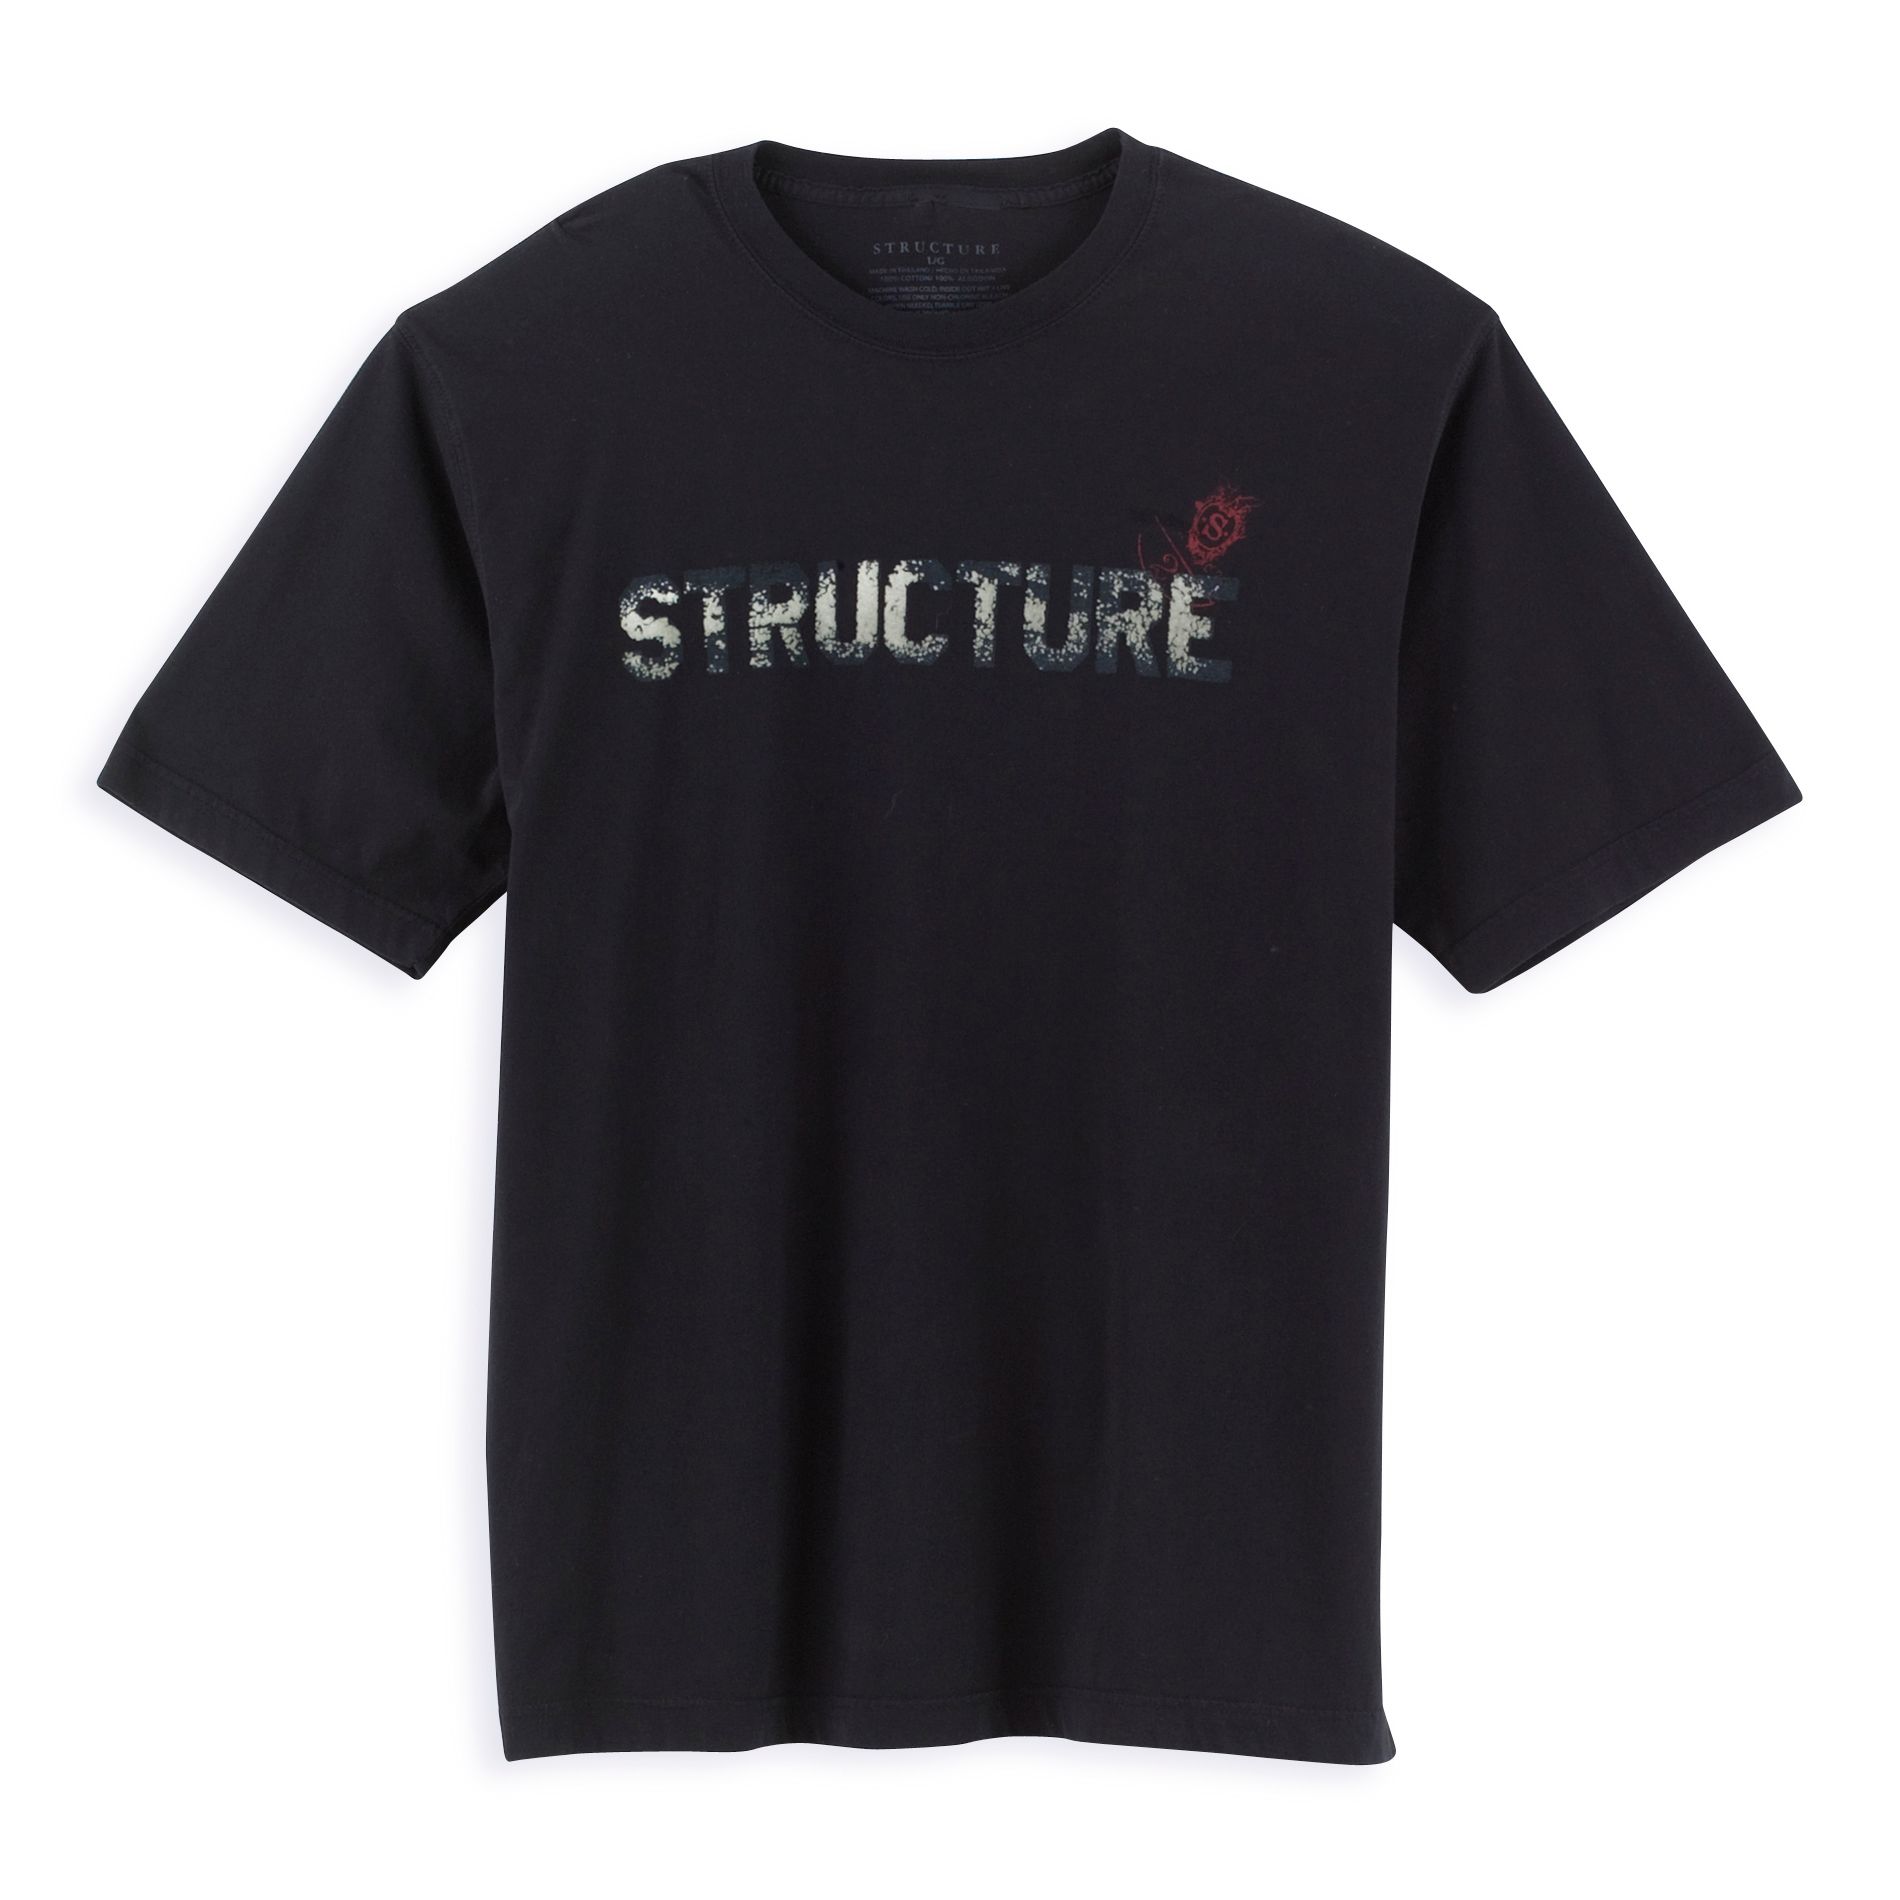 Structure Short Sleeve Graphic Tee